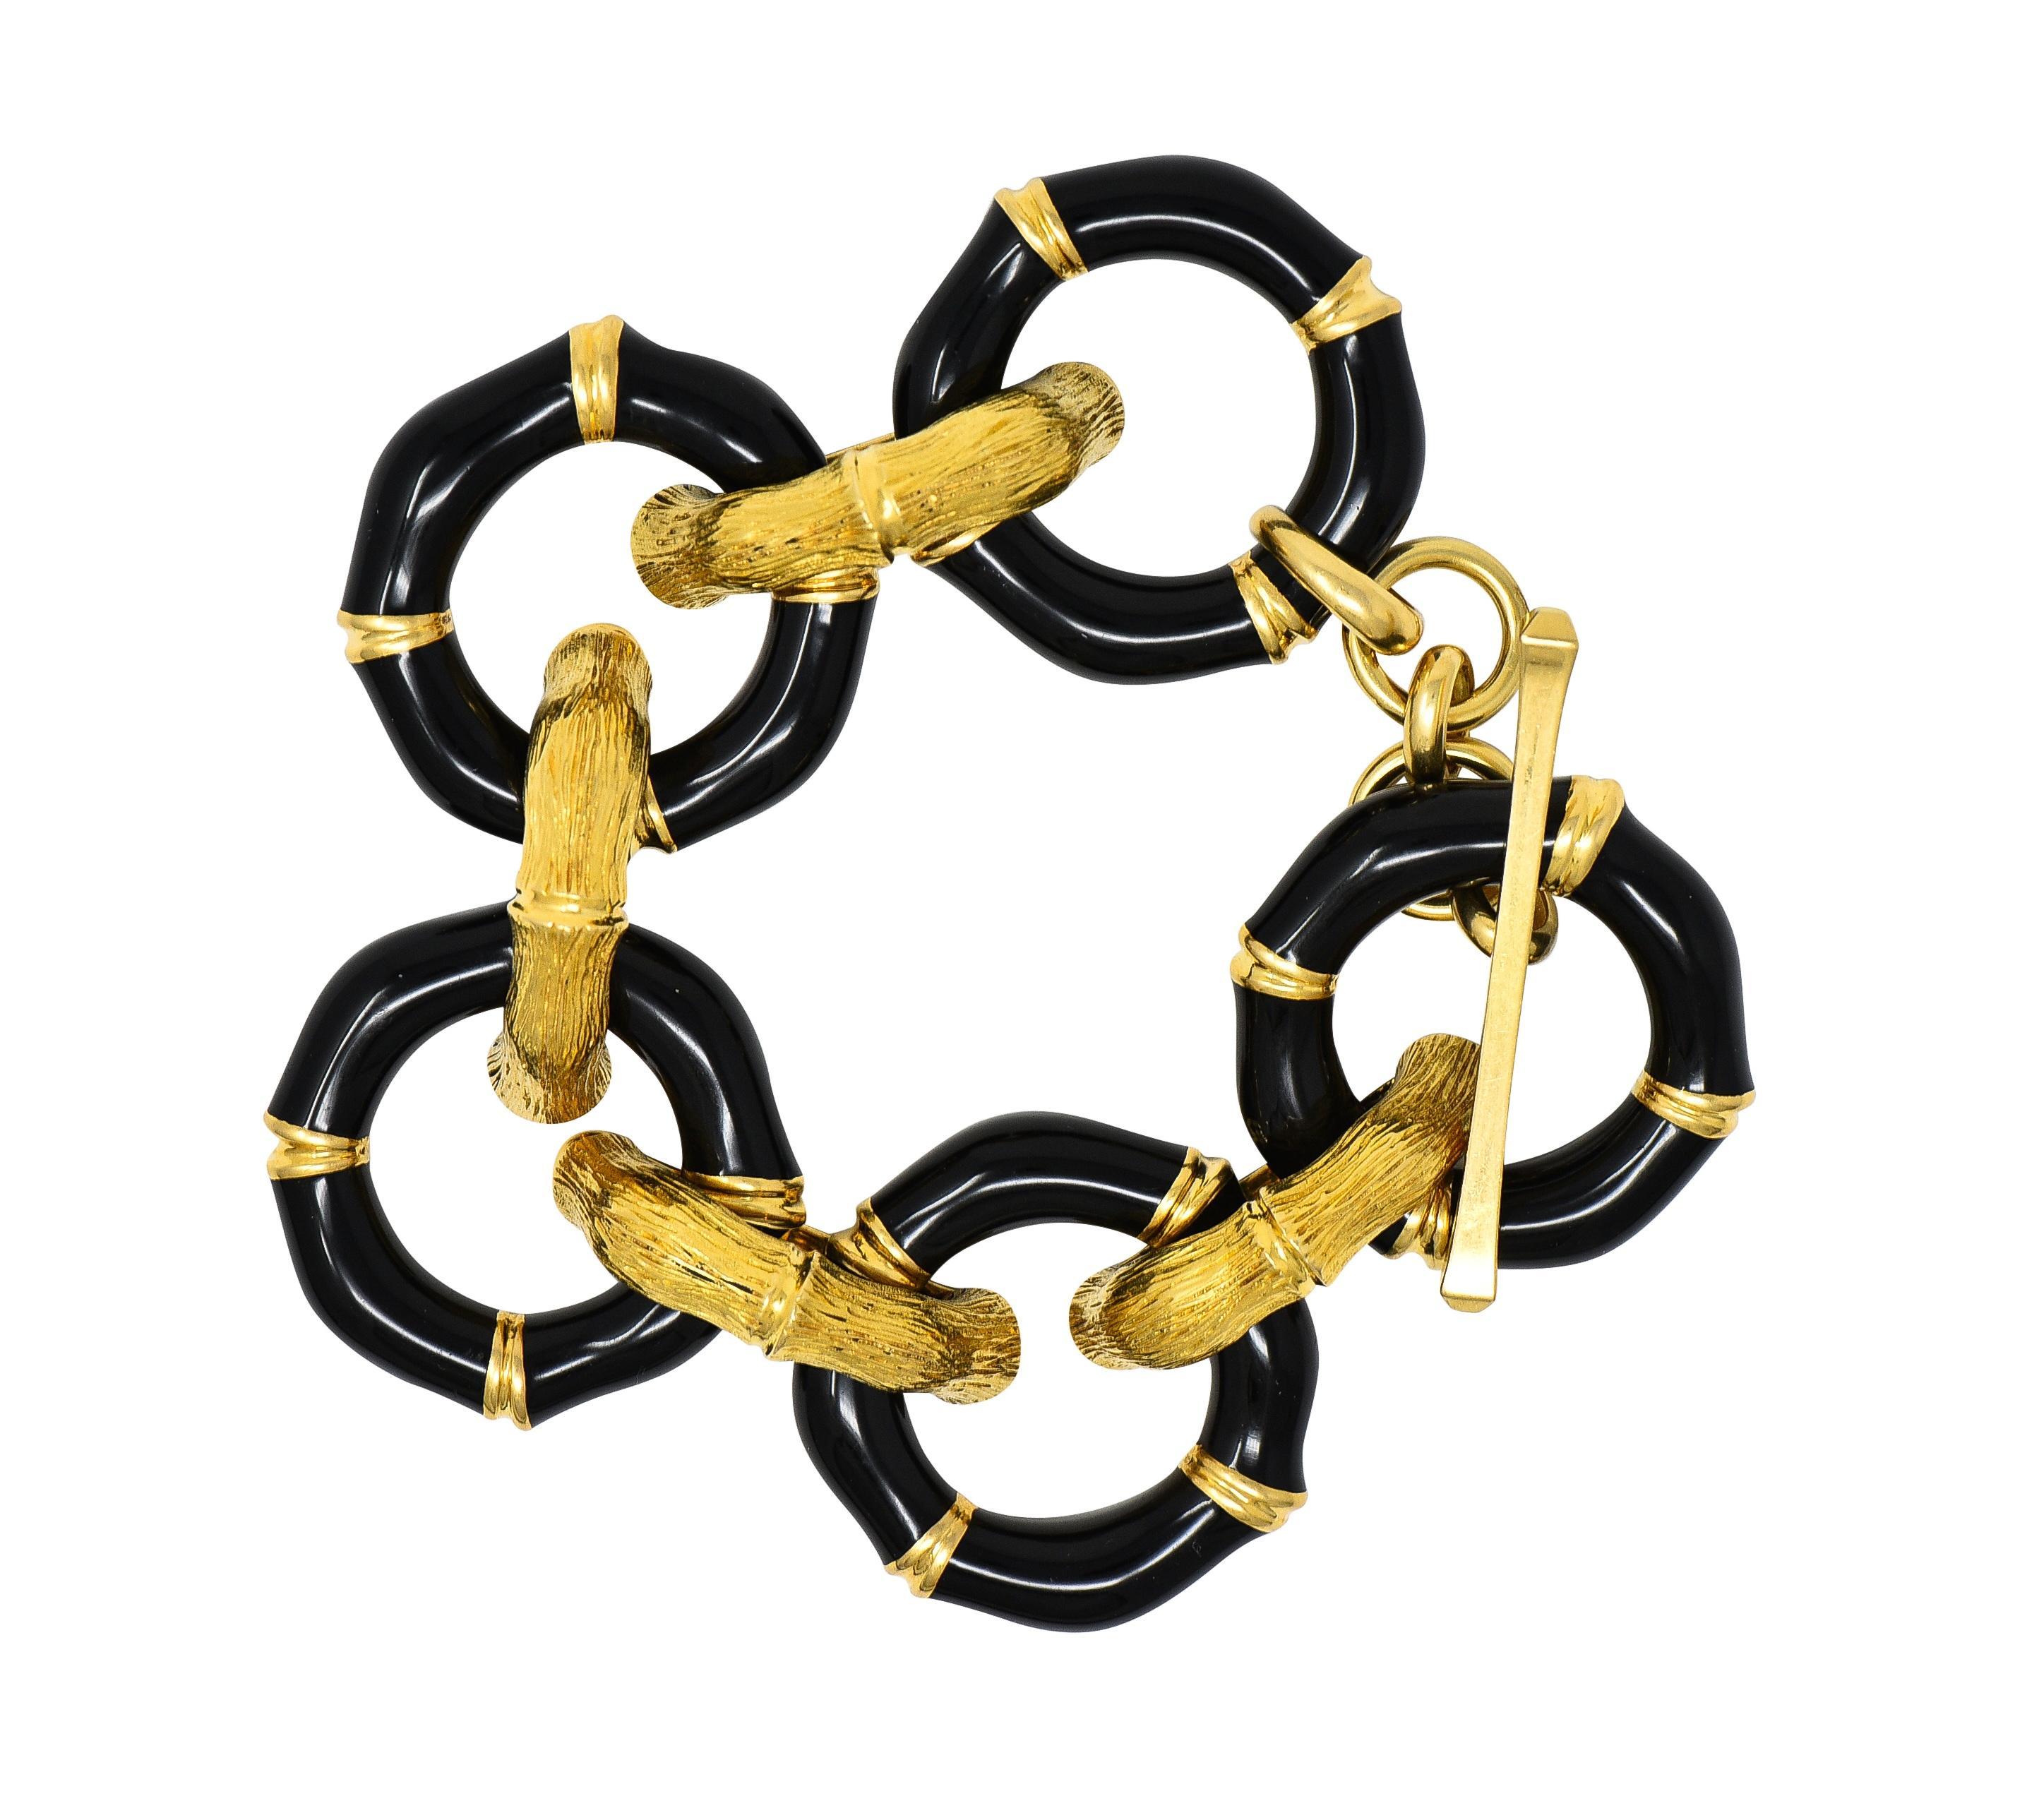 Comprised of alternating round and half-round grooved bamboo motif links
Round links are glossed with opaque black enamel - minimal loss 
Half-round links are engraved with an organic linear texture
Completed by cable link chain with large toggle